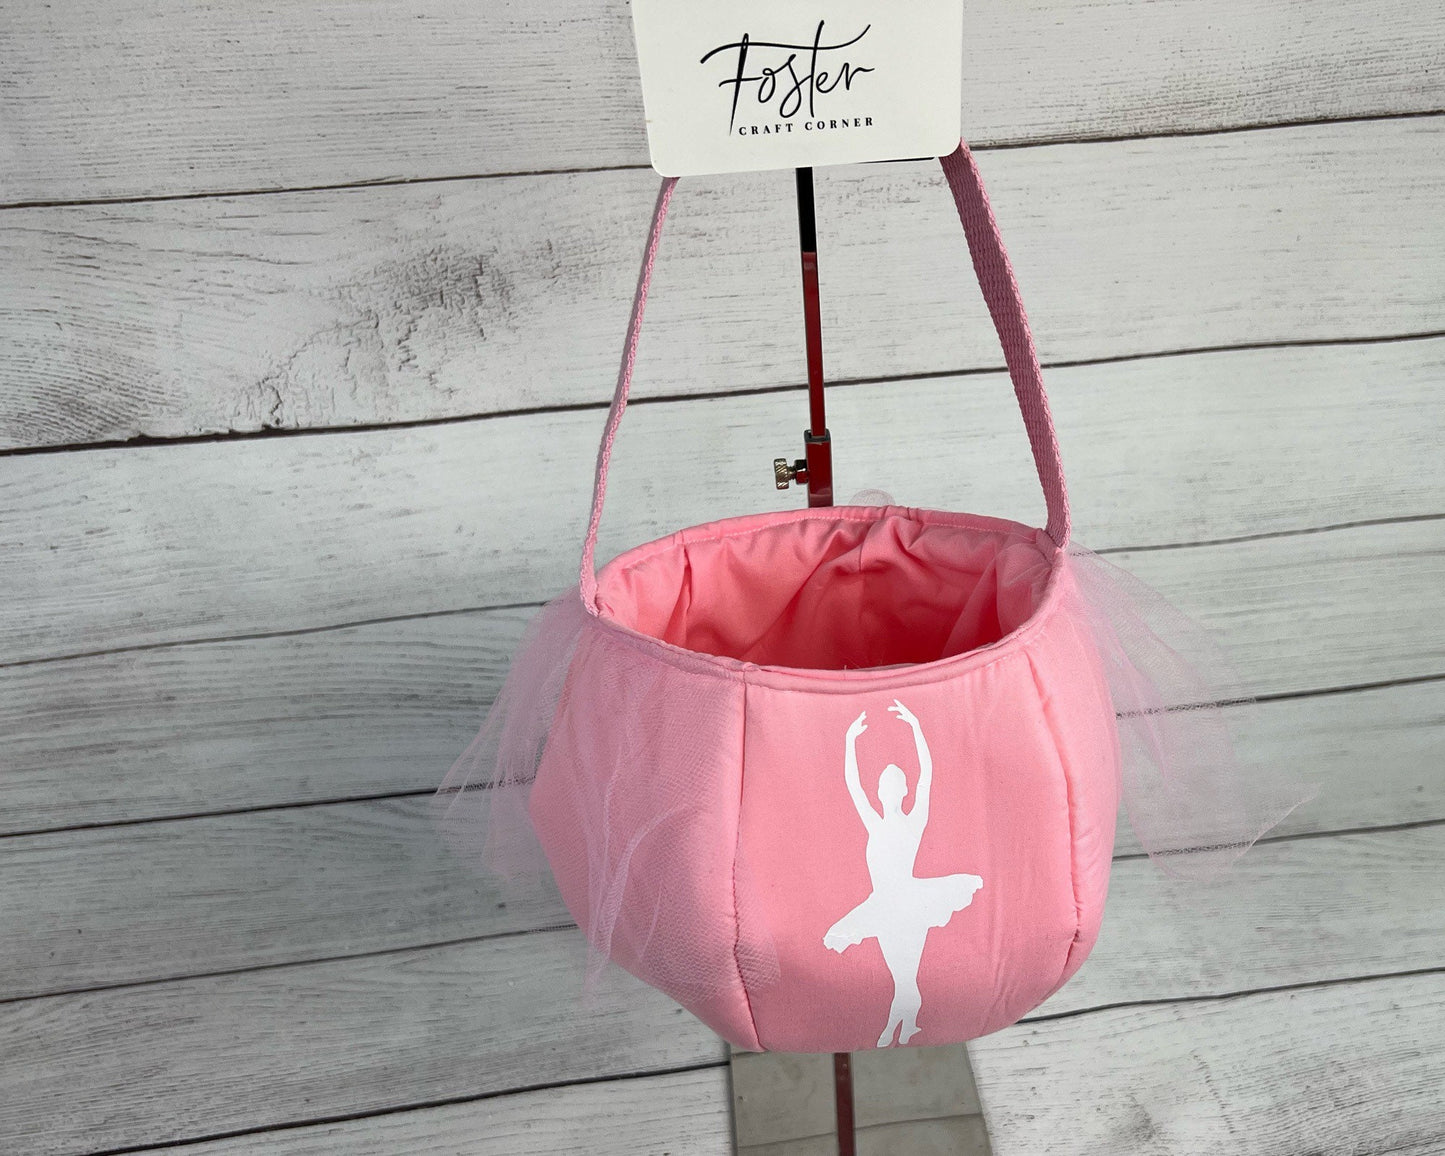 Ballerina Themed Tote Bag - Tutu- Ballet - Tights - Gift - Present- Everyday - Holiday - Easter - Halloween - Party - Gifts